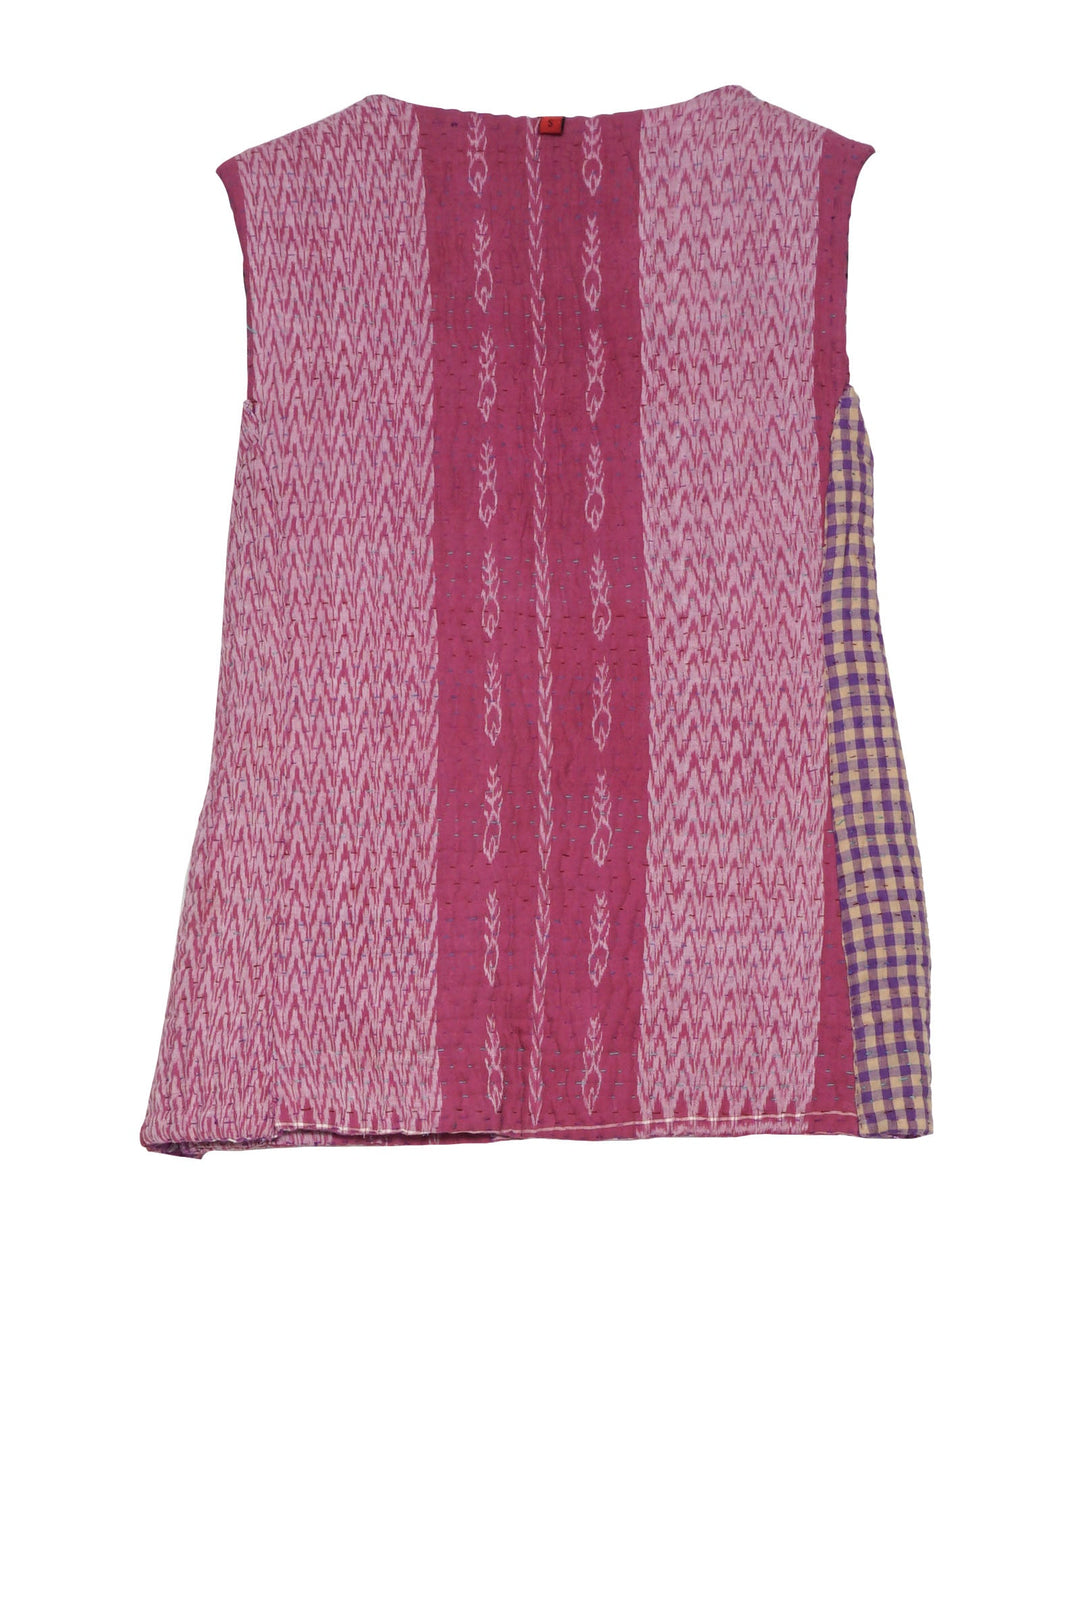 QUILTED VINTAGE COTTON KANTHA CREW NECK FITTED VEST - cq5228-0002s -